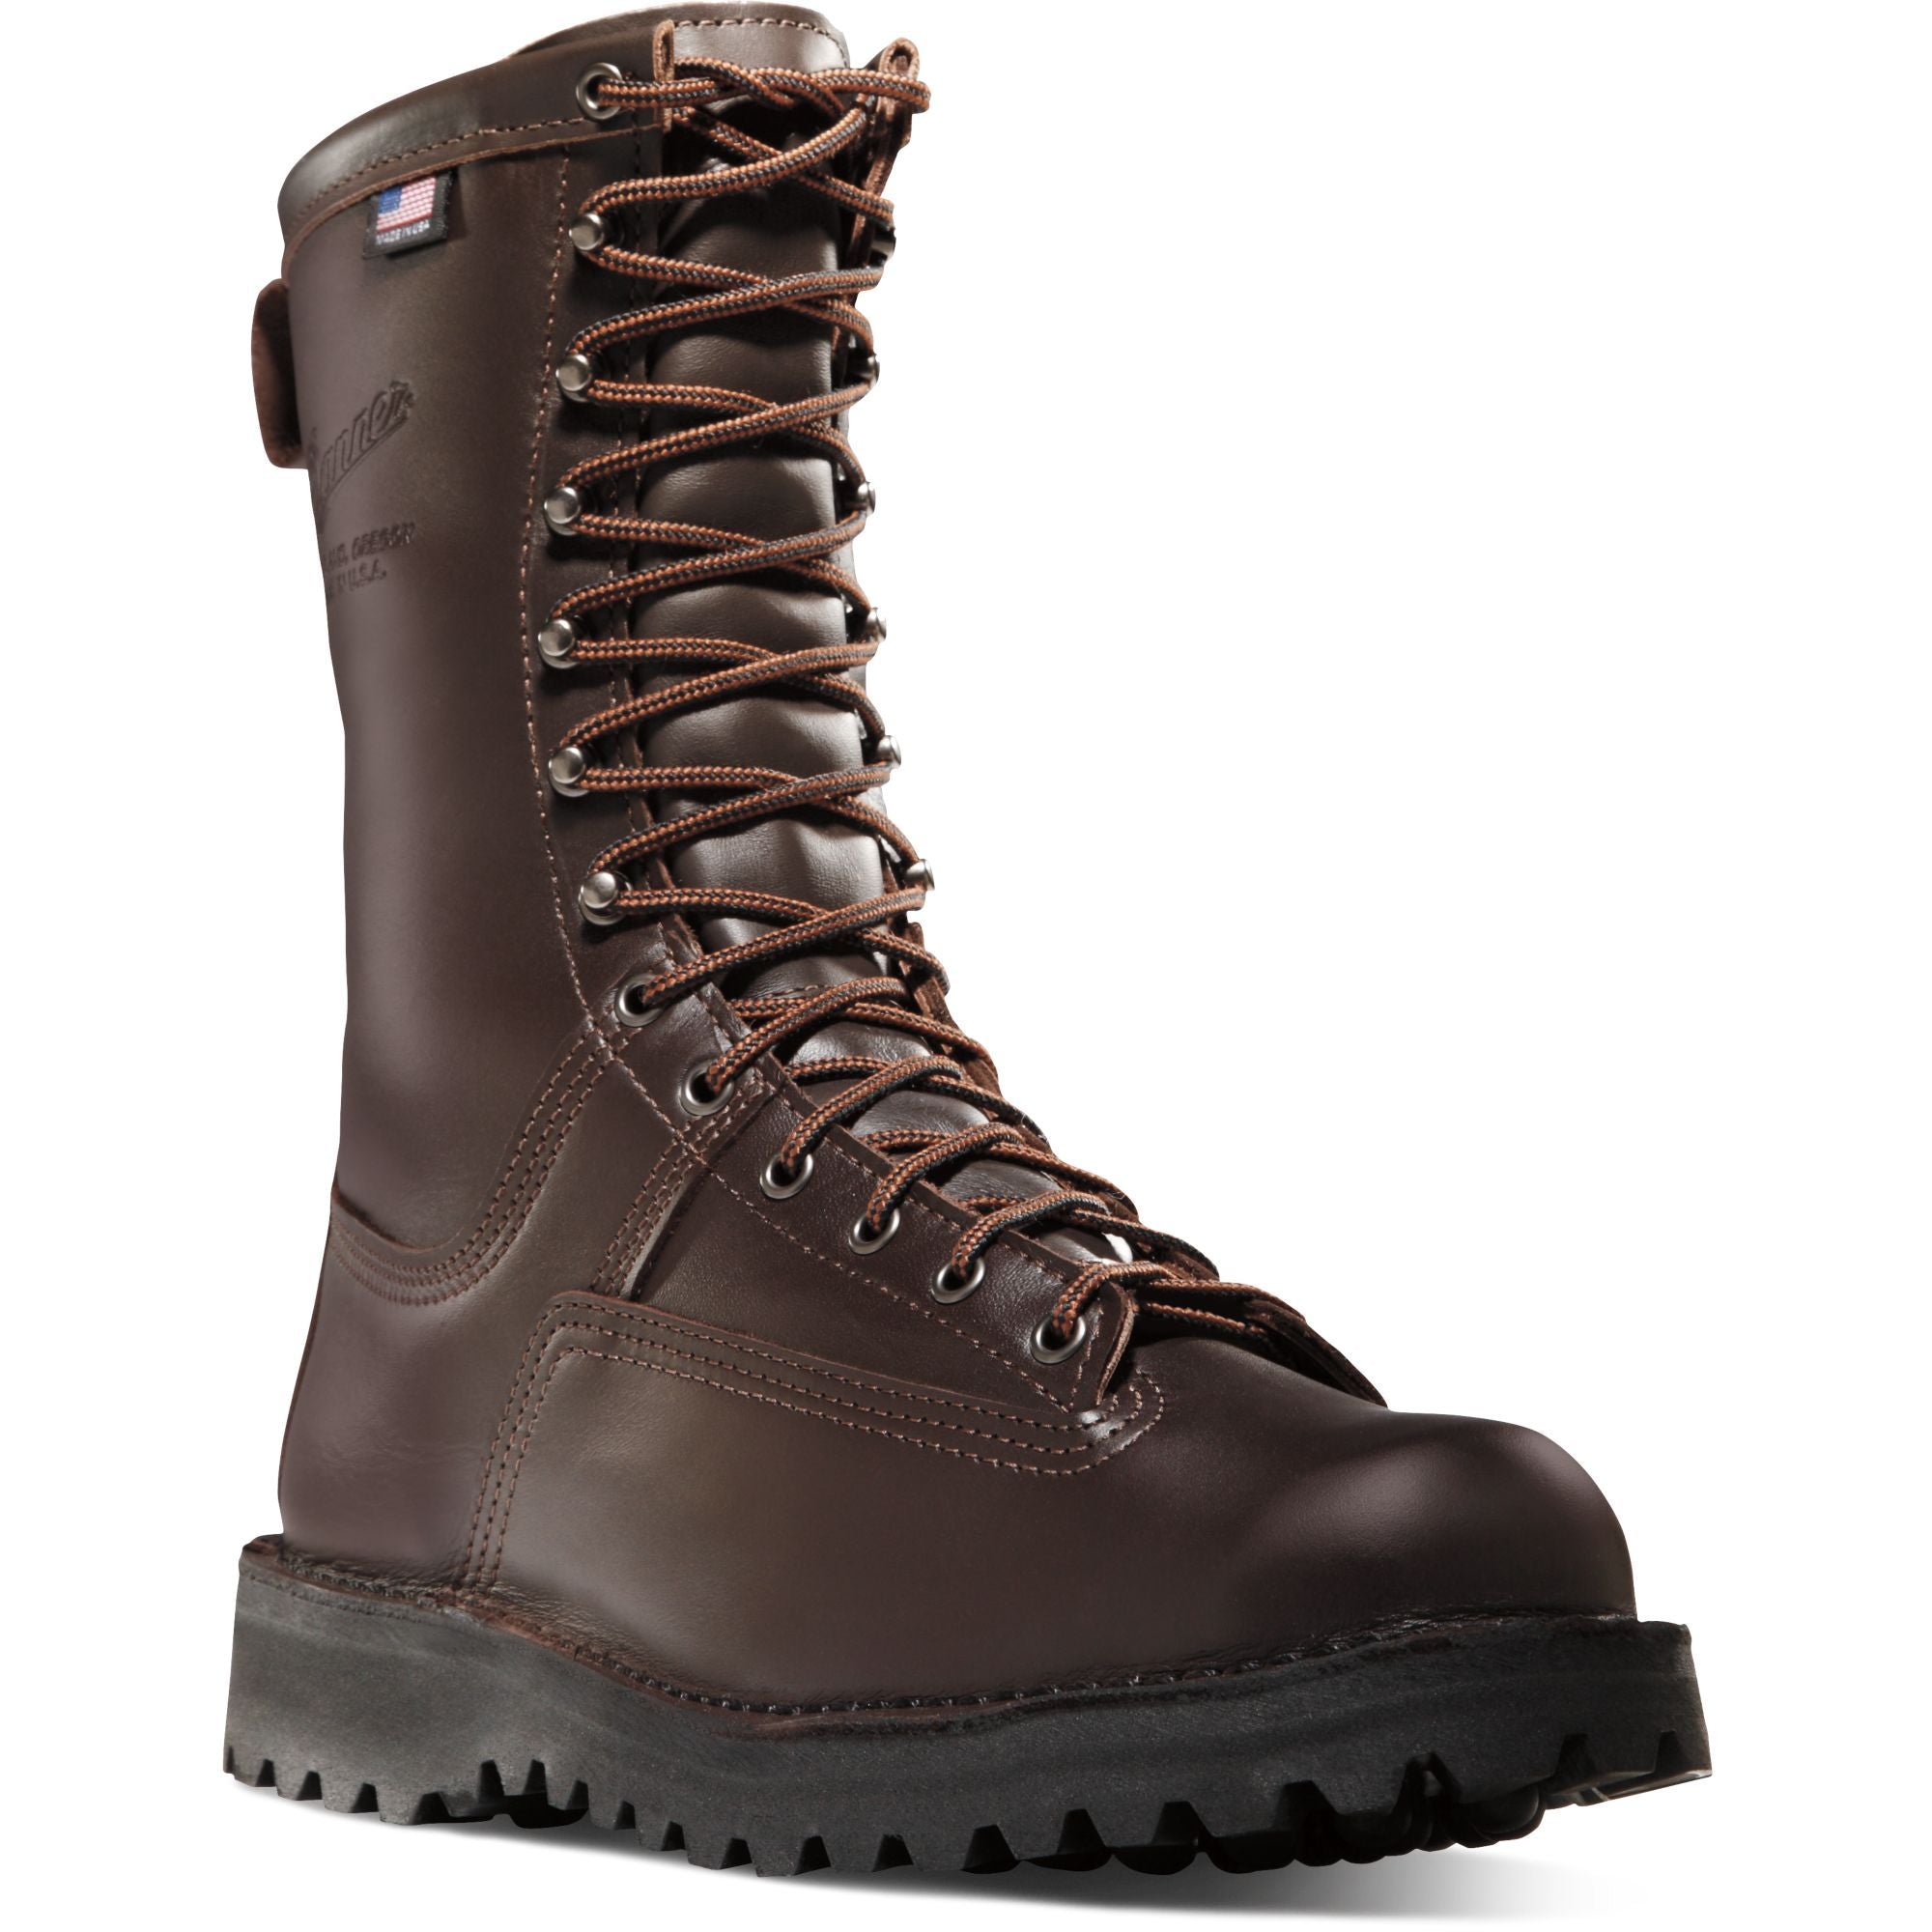 Danner Men's Canadian USA Made 10" Insulated WP Hunt Boot - 67200 7 / Medium / Brown - Overlook Boots